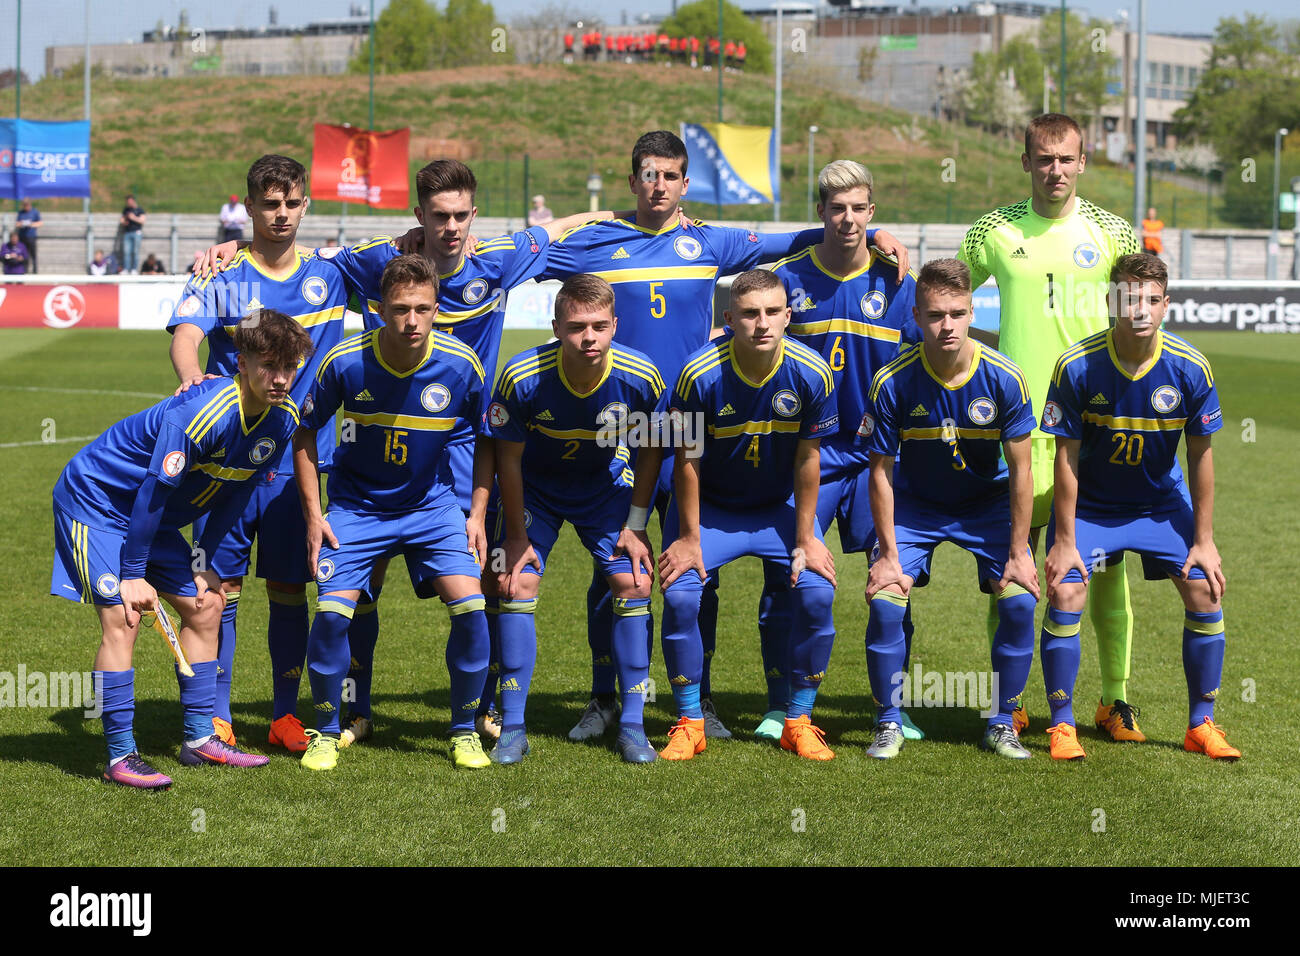 Loughborough, UK. 5th May, 2018. The Bosnia and Herzegovina team line up before the 2018 UEFA European Under-17 Championship Group C match between Denmark and Bosnia and Herzegovina at Loughborough University Stadium on May 5th 2018 in Loughborough, England. (Photo by Paul Chesterton/phcimages.com) Credit: PHC Images/Alamy Live News Stock Photo